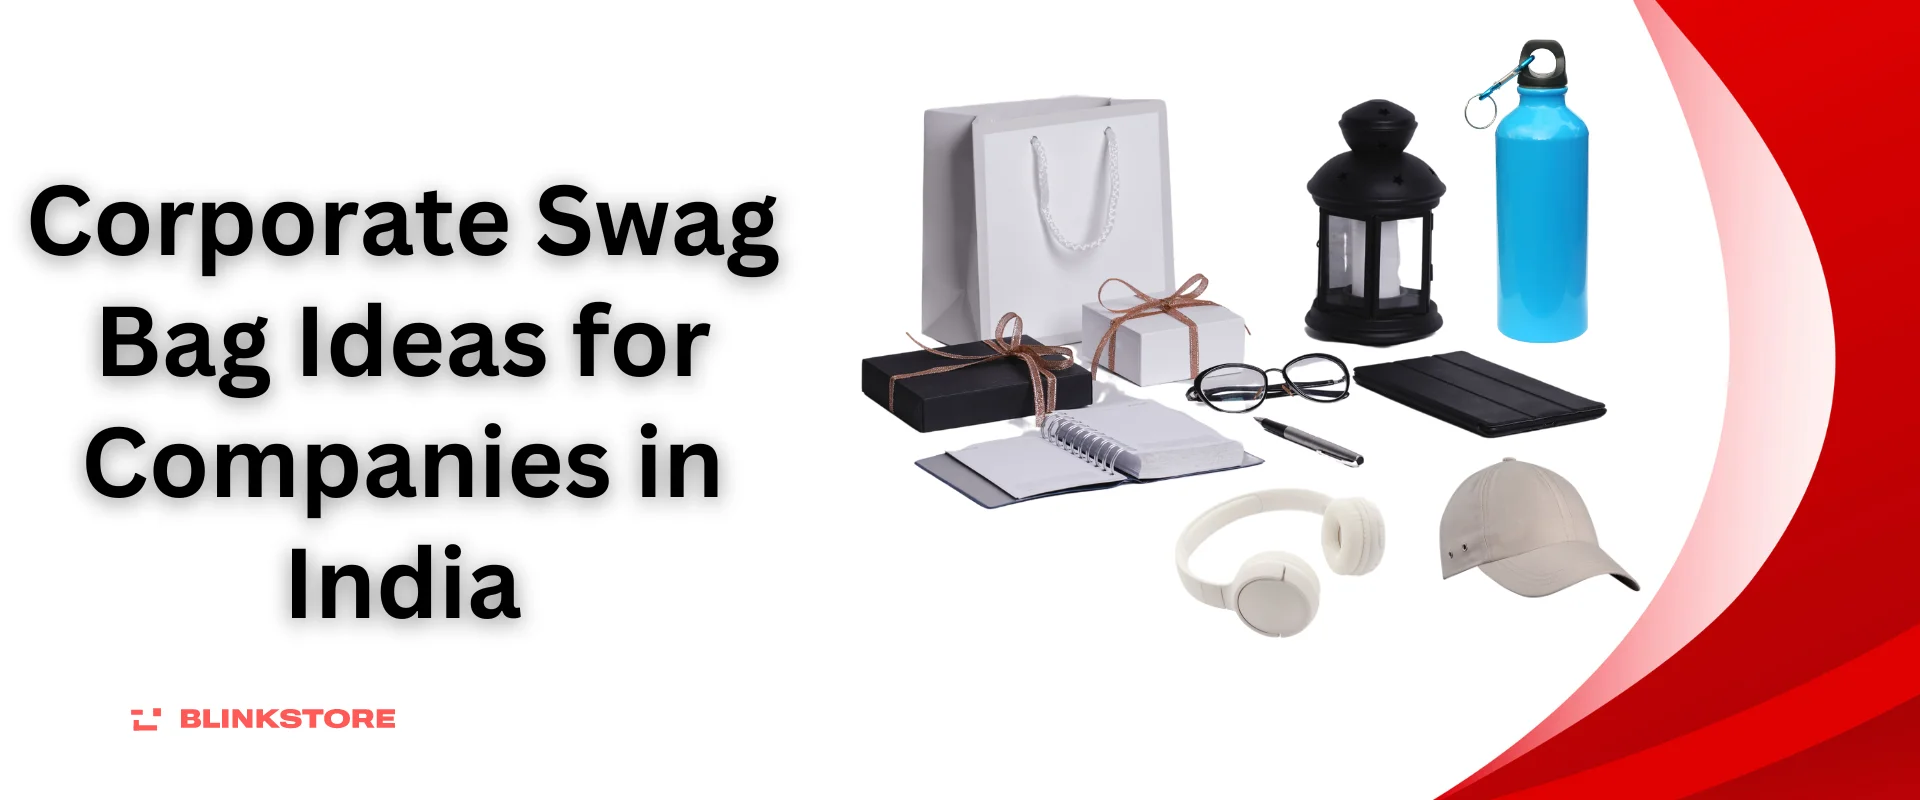 Corporate Swag Bag Ideas for Companies in India